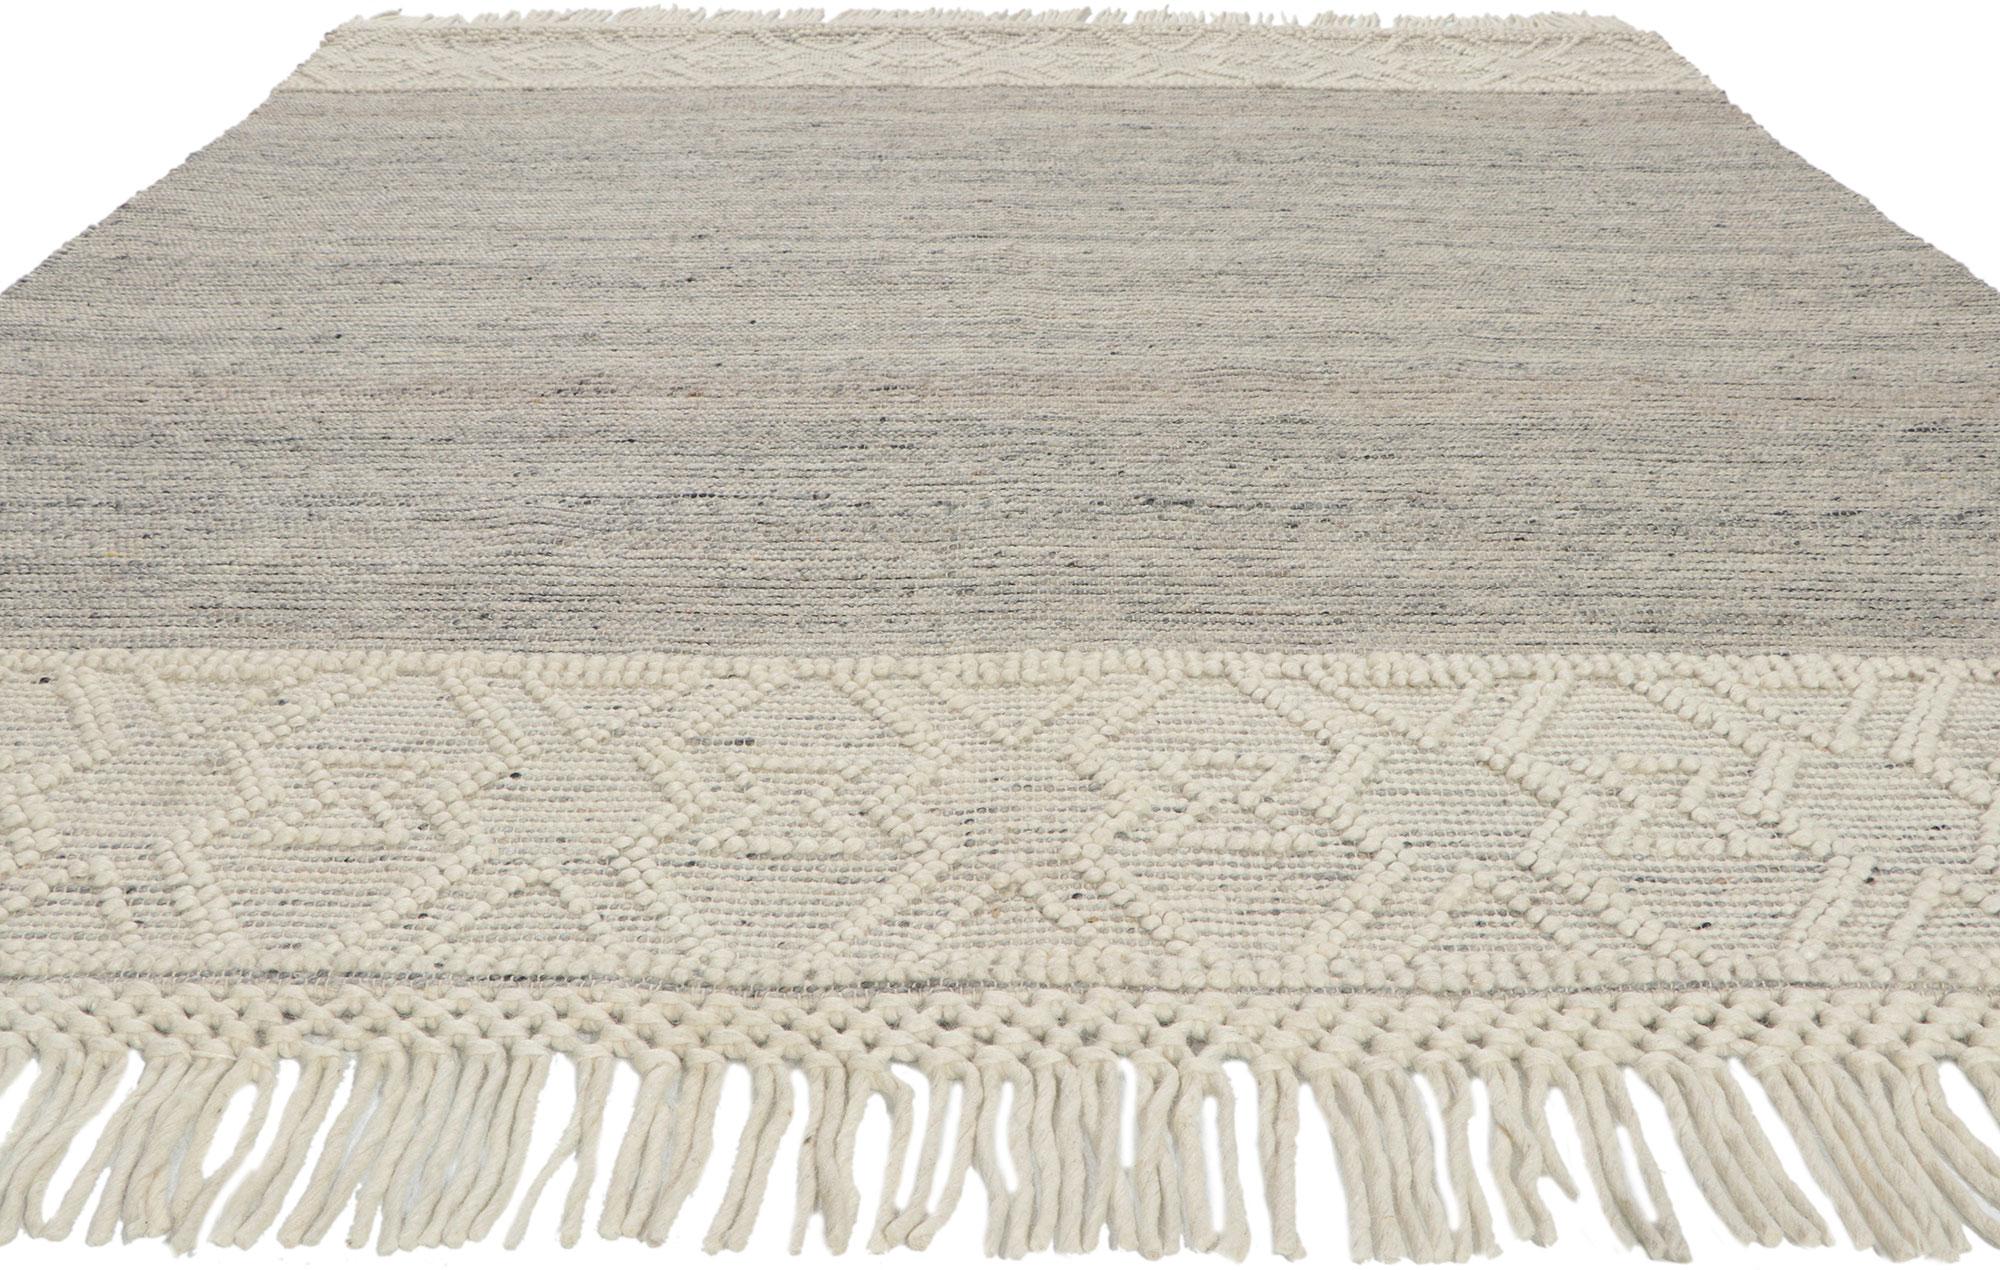 Bohemian New Handwoven Textured Jute Rug For Sale